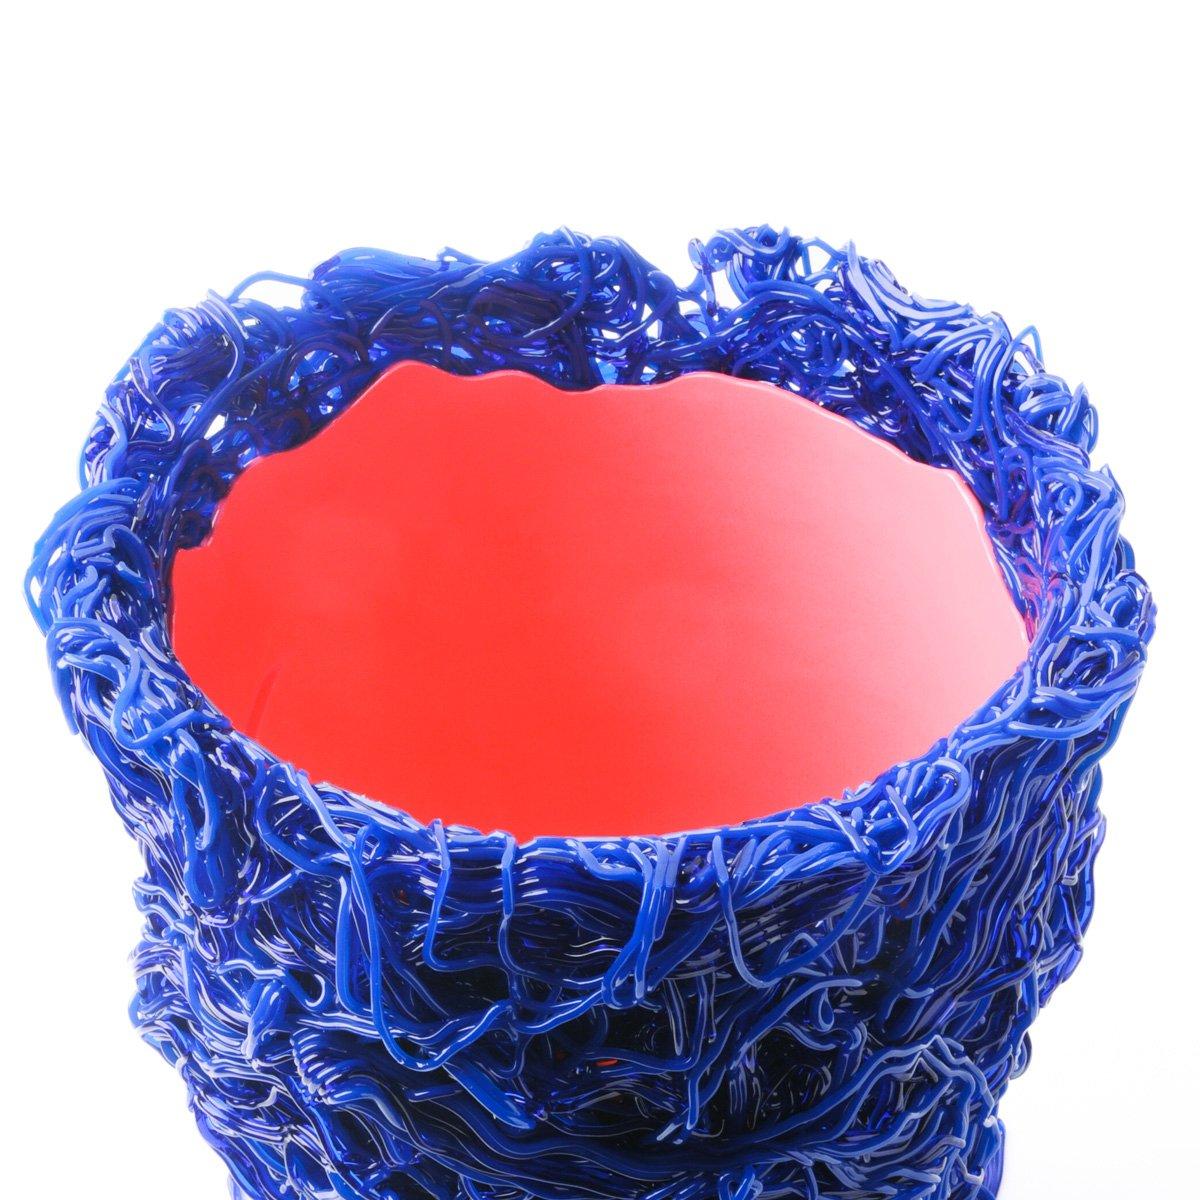 Moss Vase - clear blue matt blue and fuchsia.
Vase in soft resin designed by Gaetano Pesce for Fish Design 1995 collection.
Measures: L - ø 26cm x H 38cm

It was in New York, in the mid-1990s, that the Maestro created the Fish Design collection, one